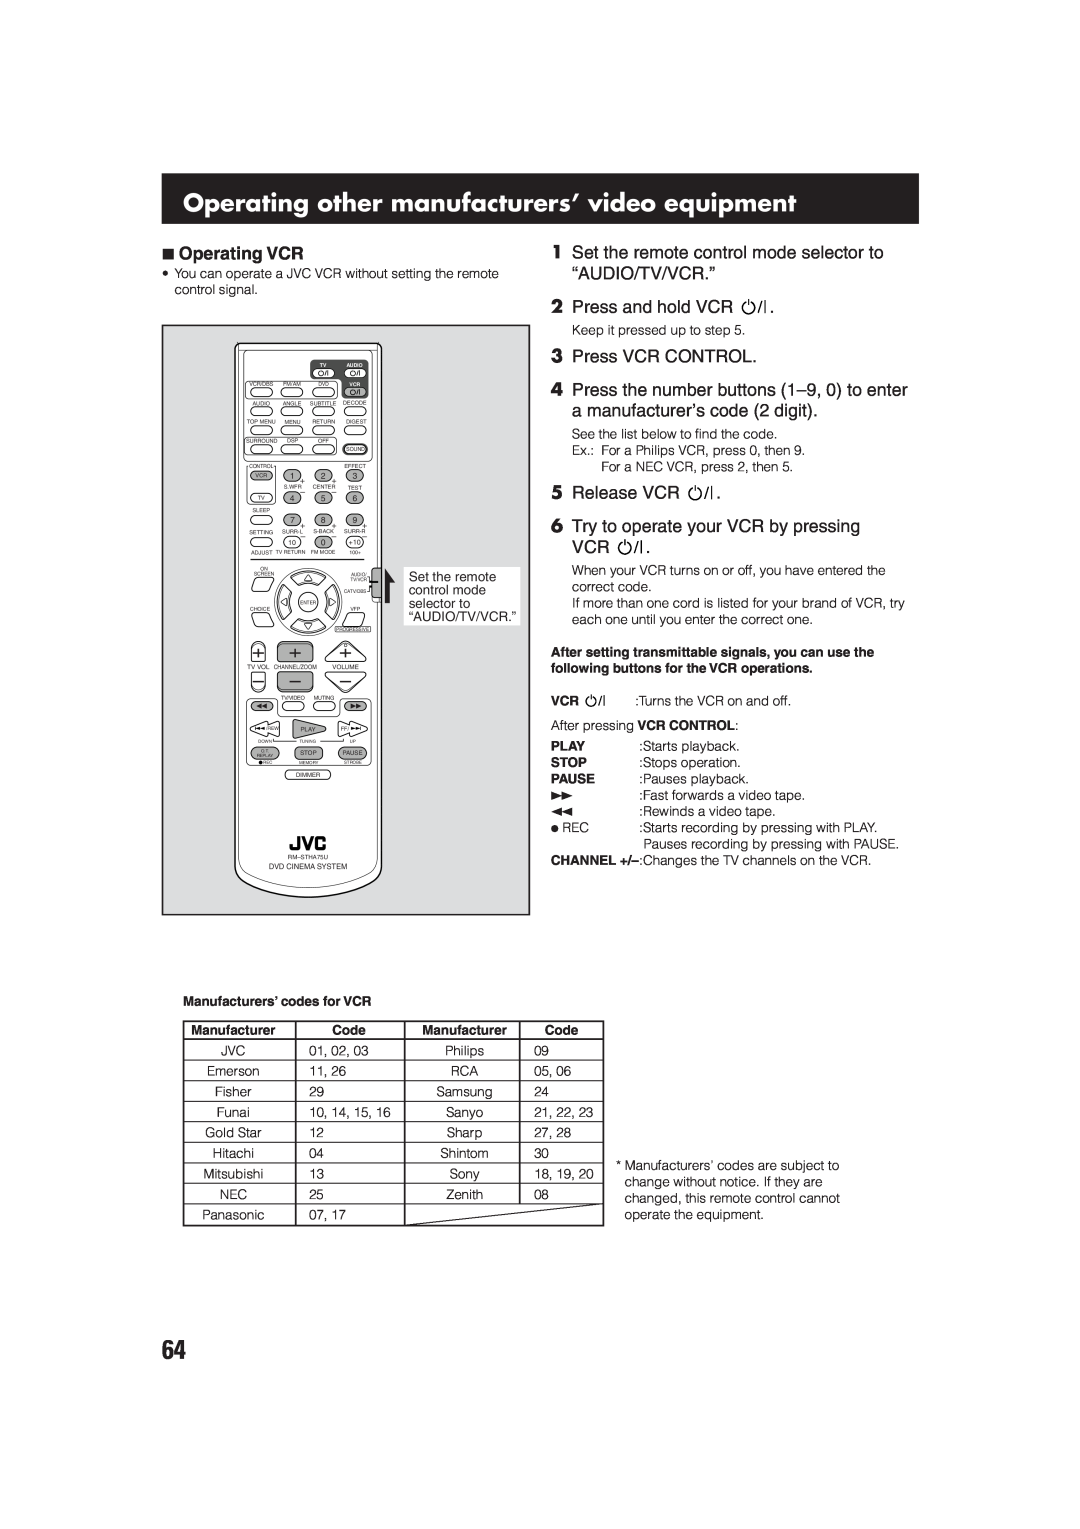 JVC TH-A75 Operating other manufacturers’ video equipment, Operating VCR, Set the remote control mode selector to, Play 